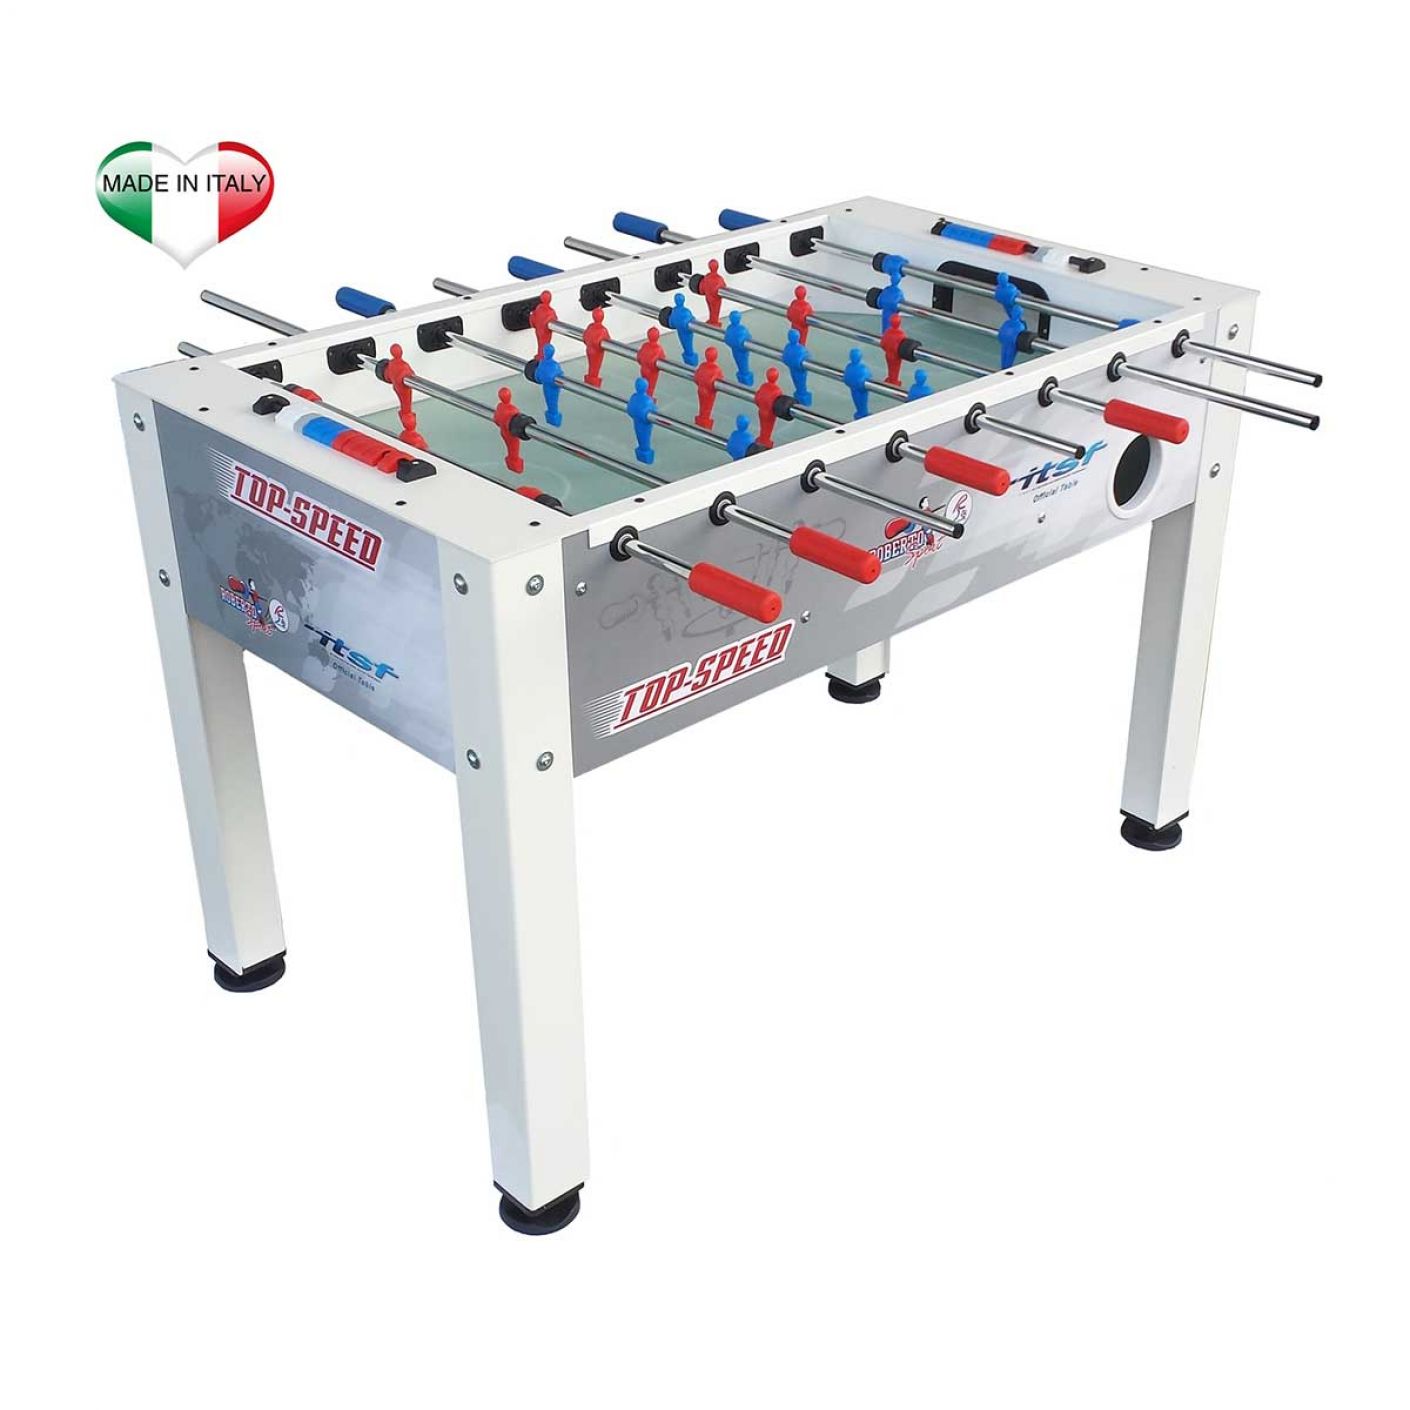 Roberto Sport Top Speed Official ITSF football table